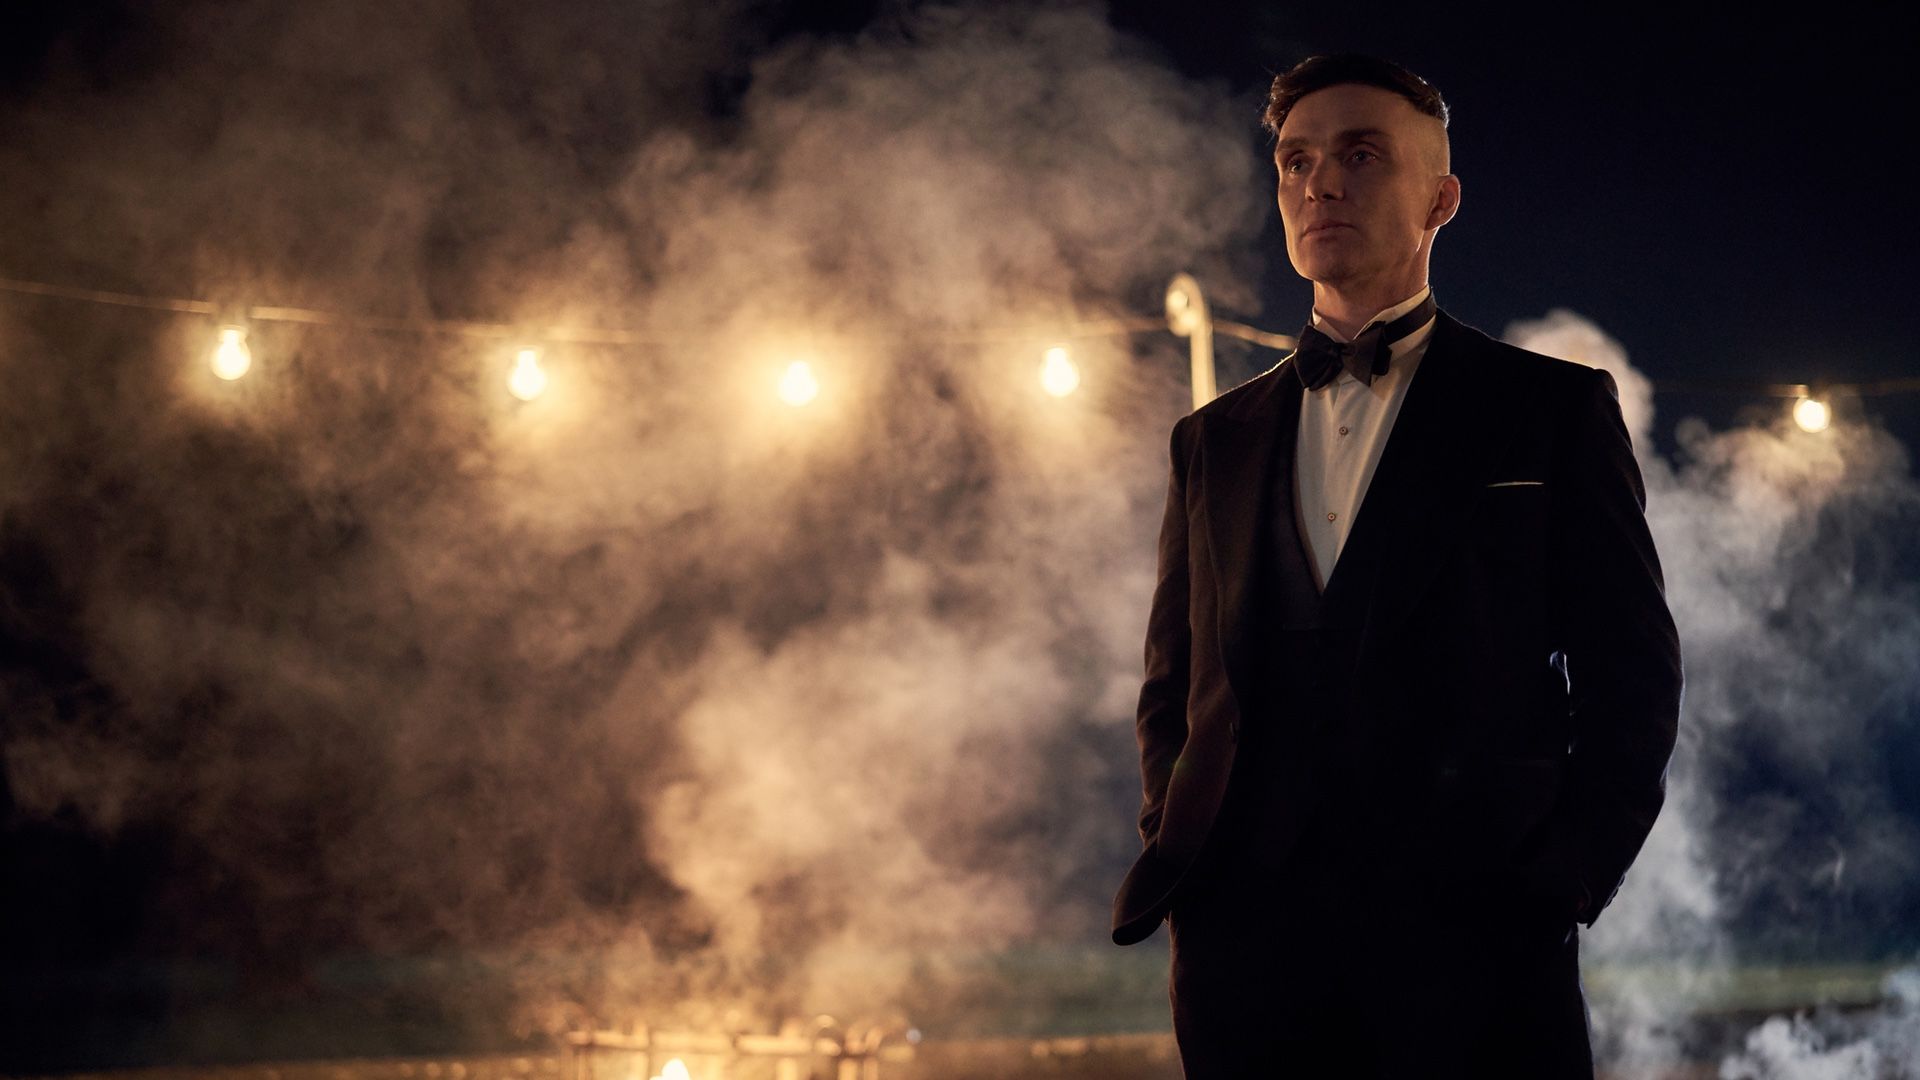 The Long Awaited Fifth Season Of Netflix's PEAKY BLINDERS Gets A